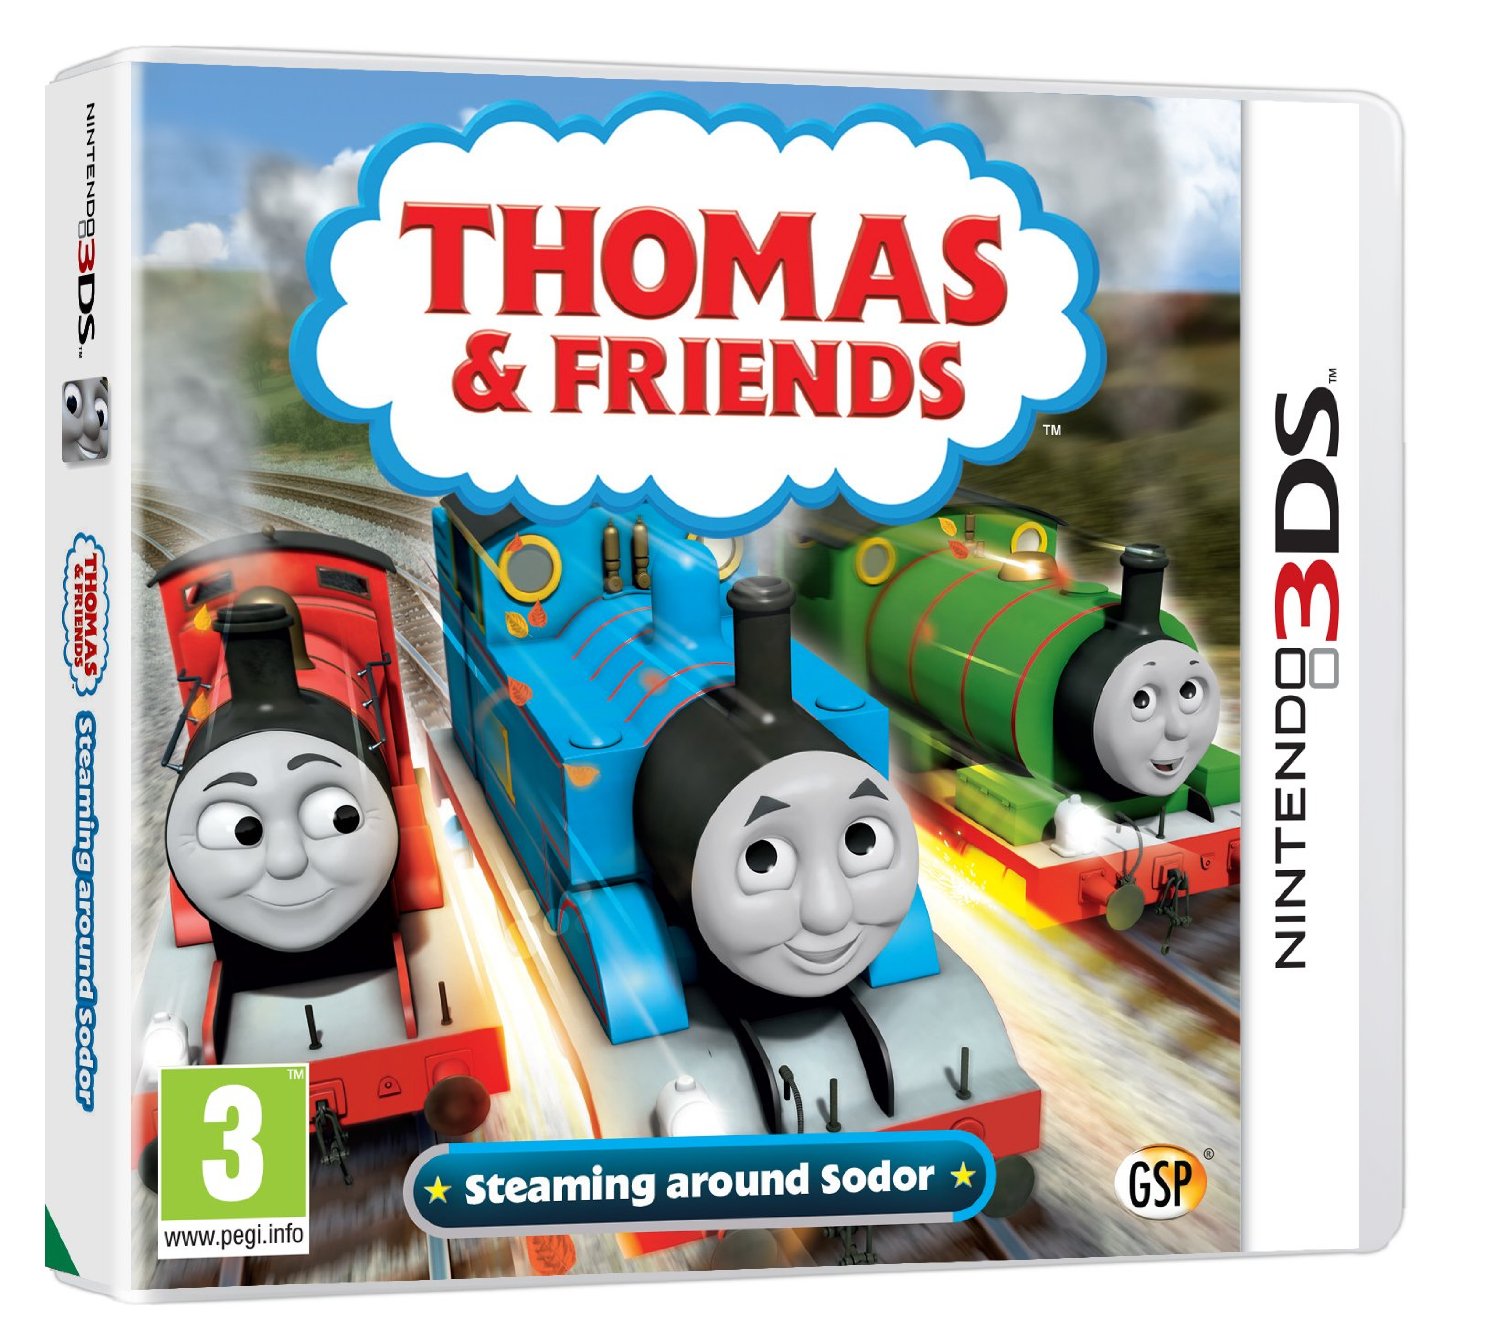 Thomas & Friends: Steaming Around Sodor (3DS), Avanquest Software